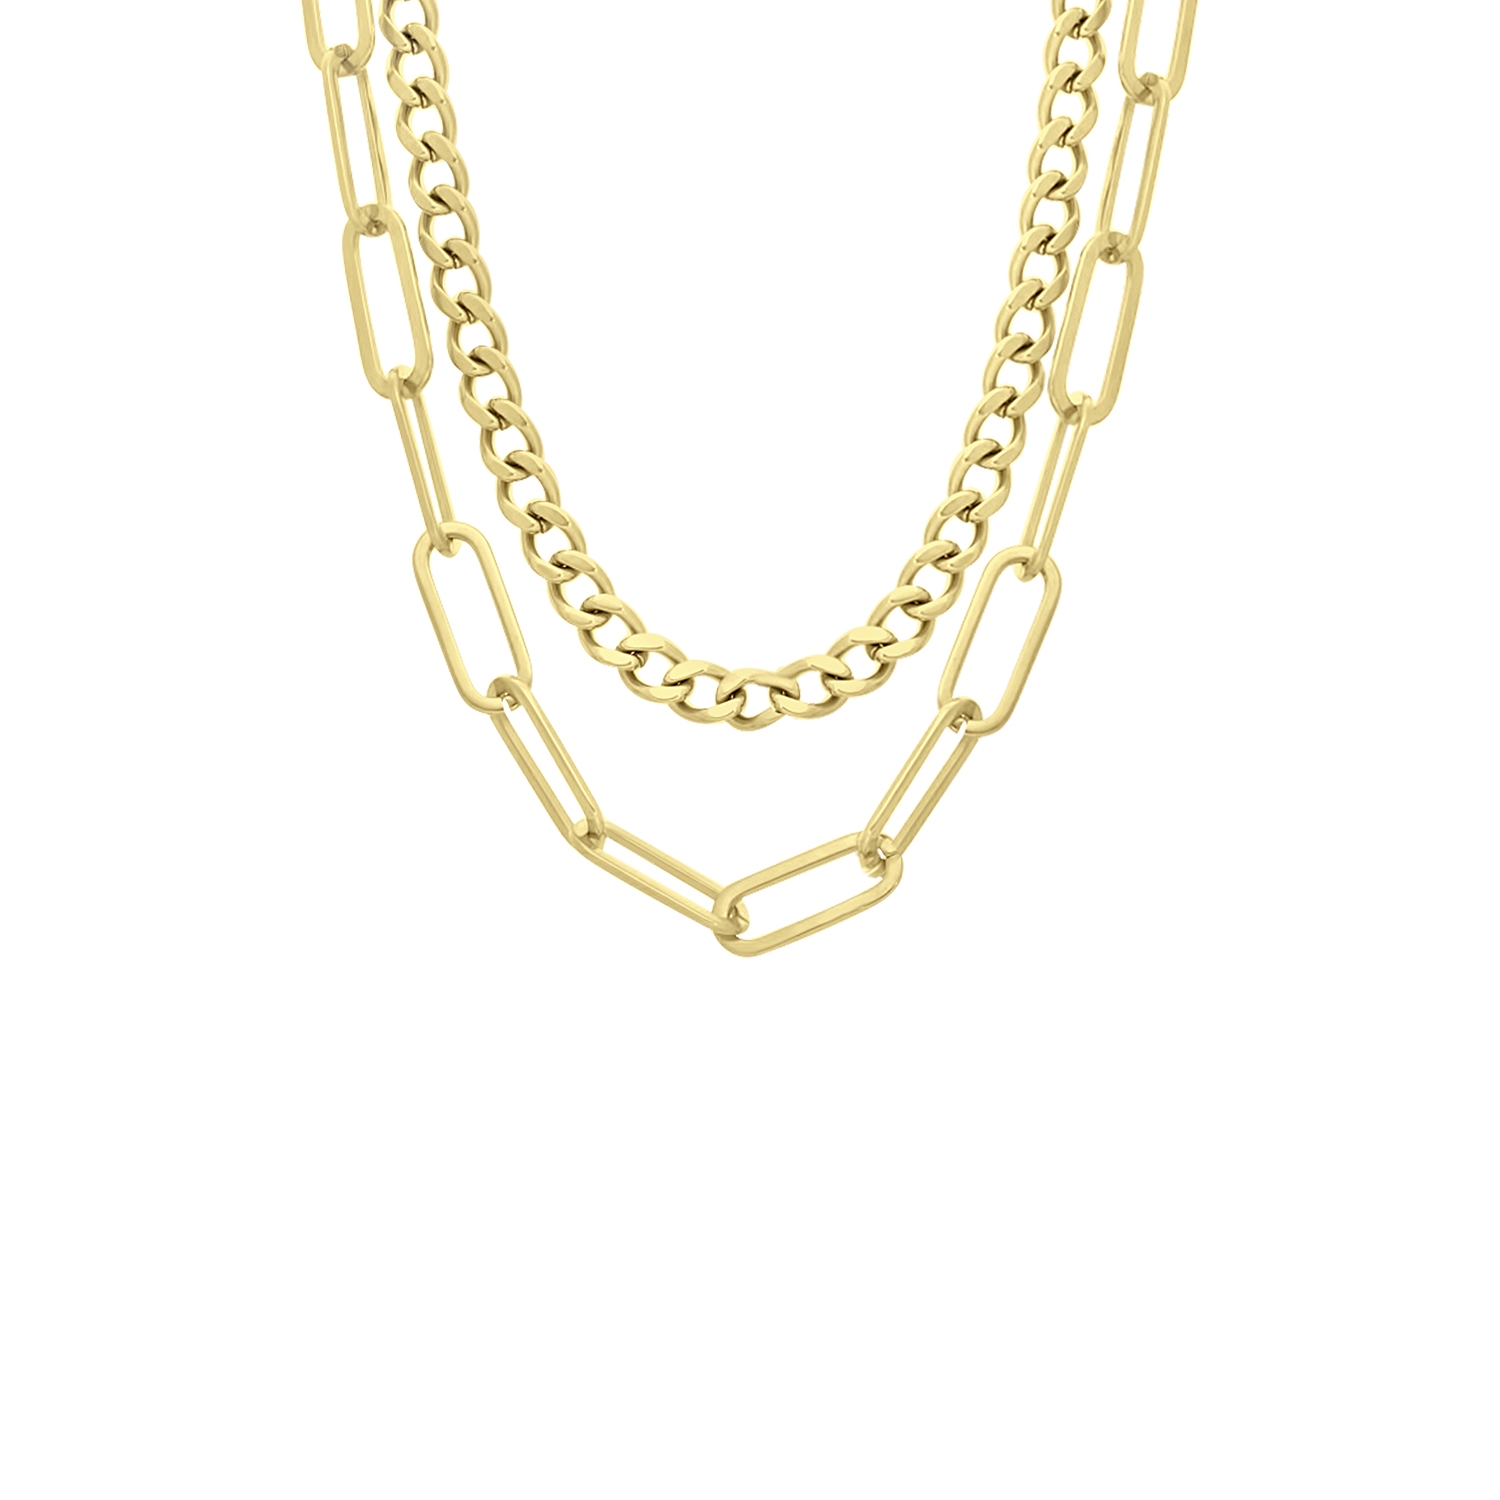 Goldplated ketting